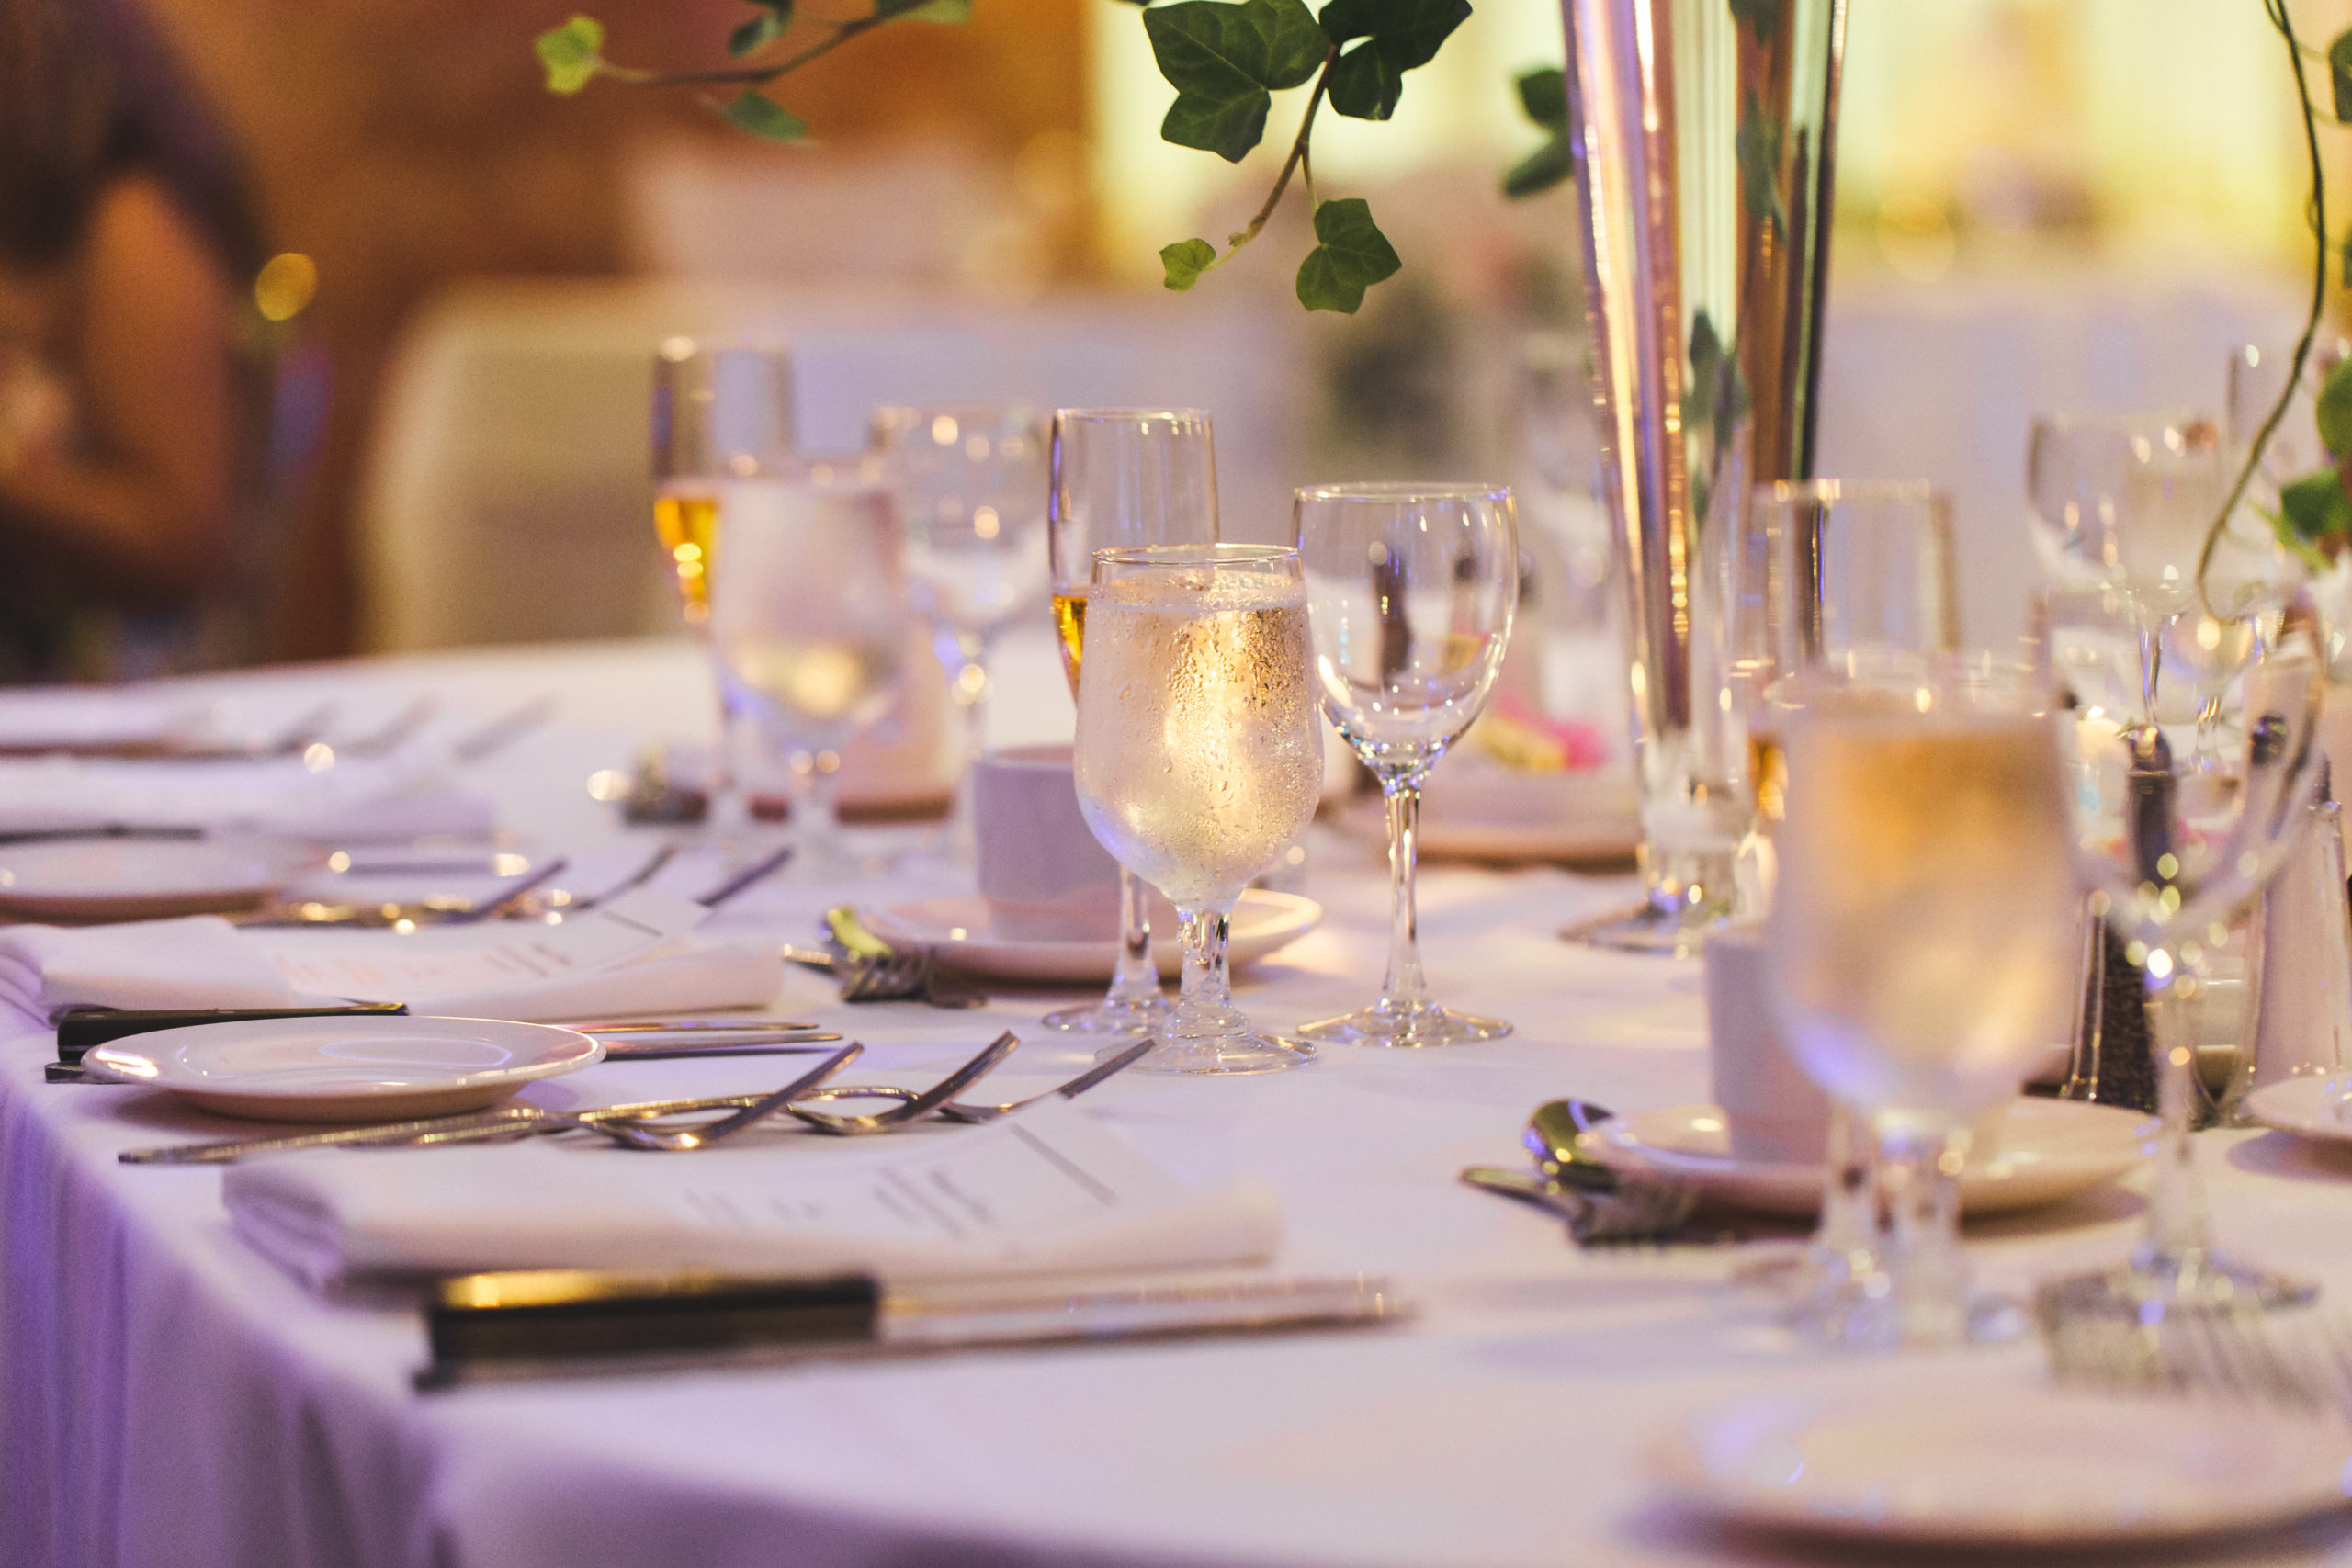 A tip for a photogenic wedding is stemware